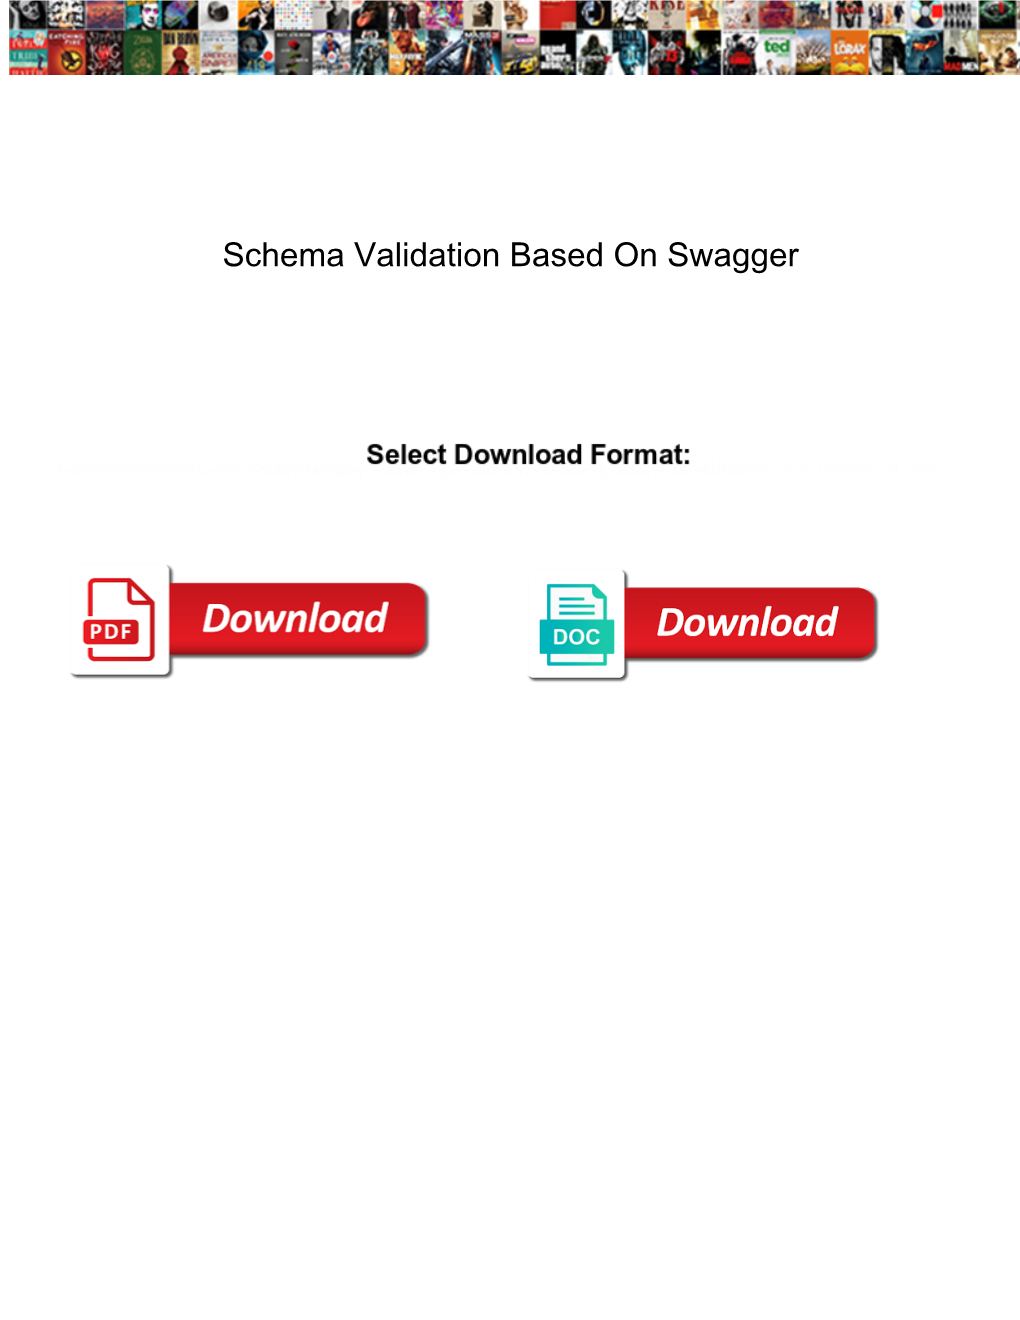 Schema Validation Based on Swagger